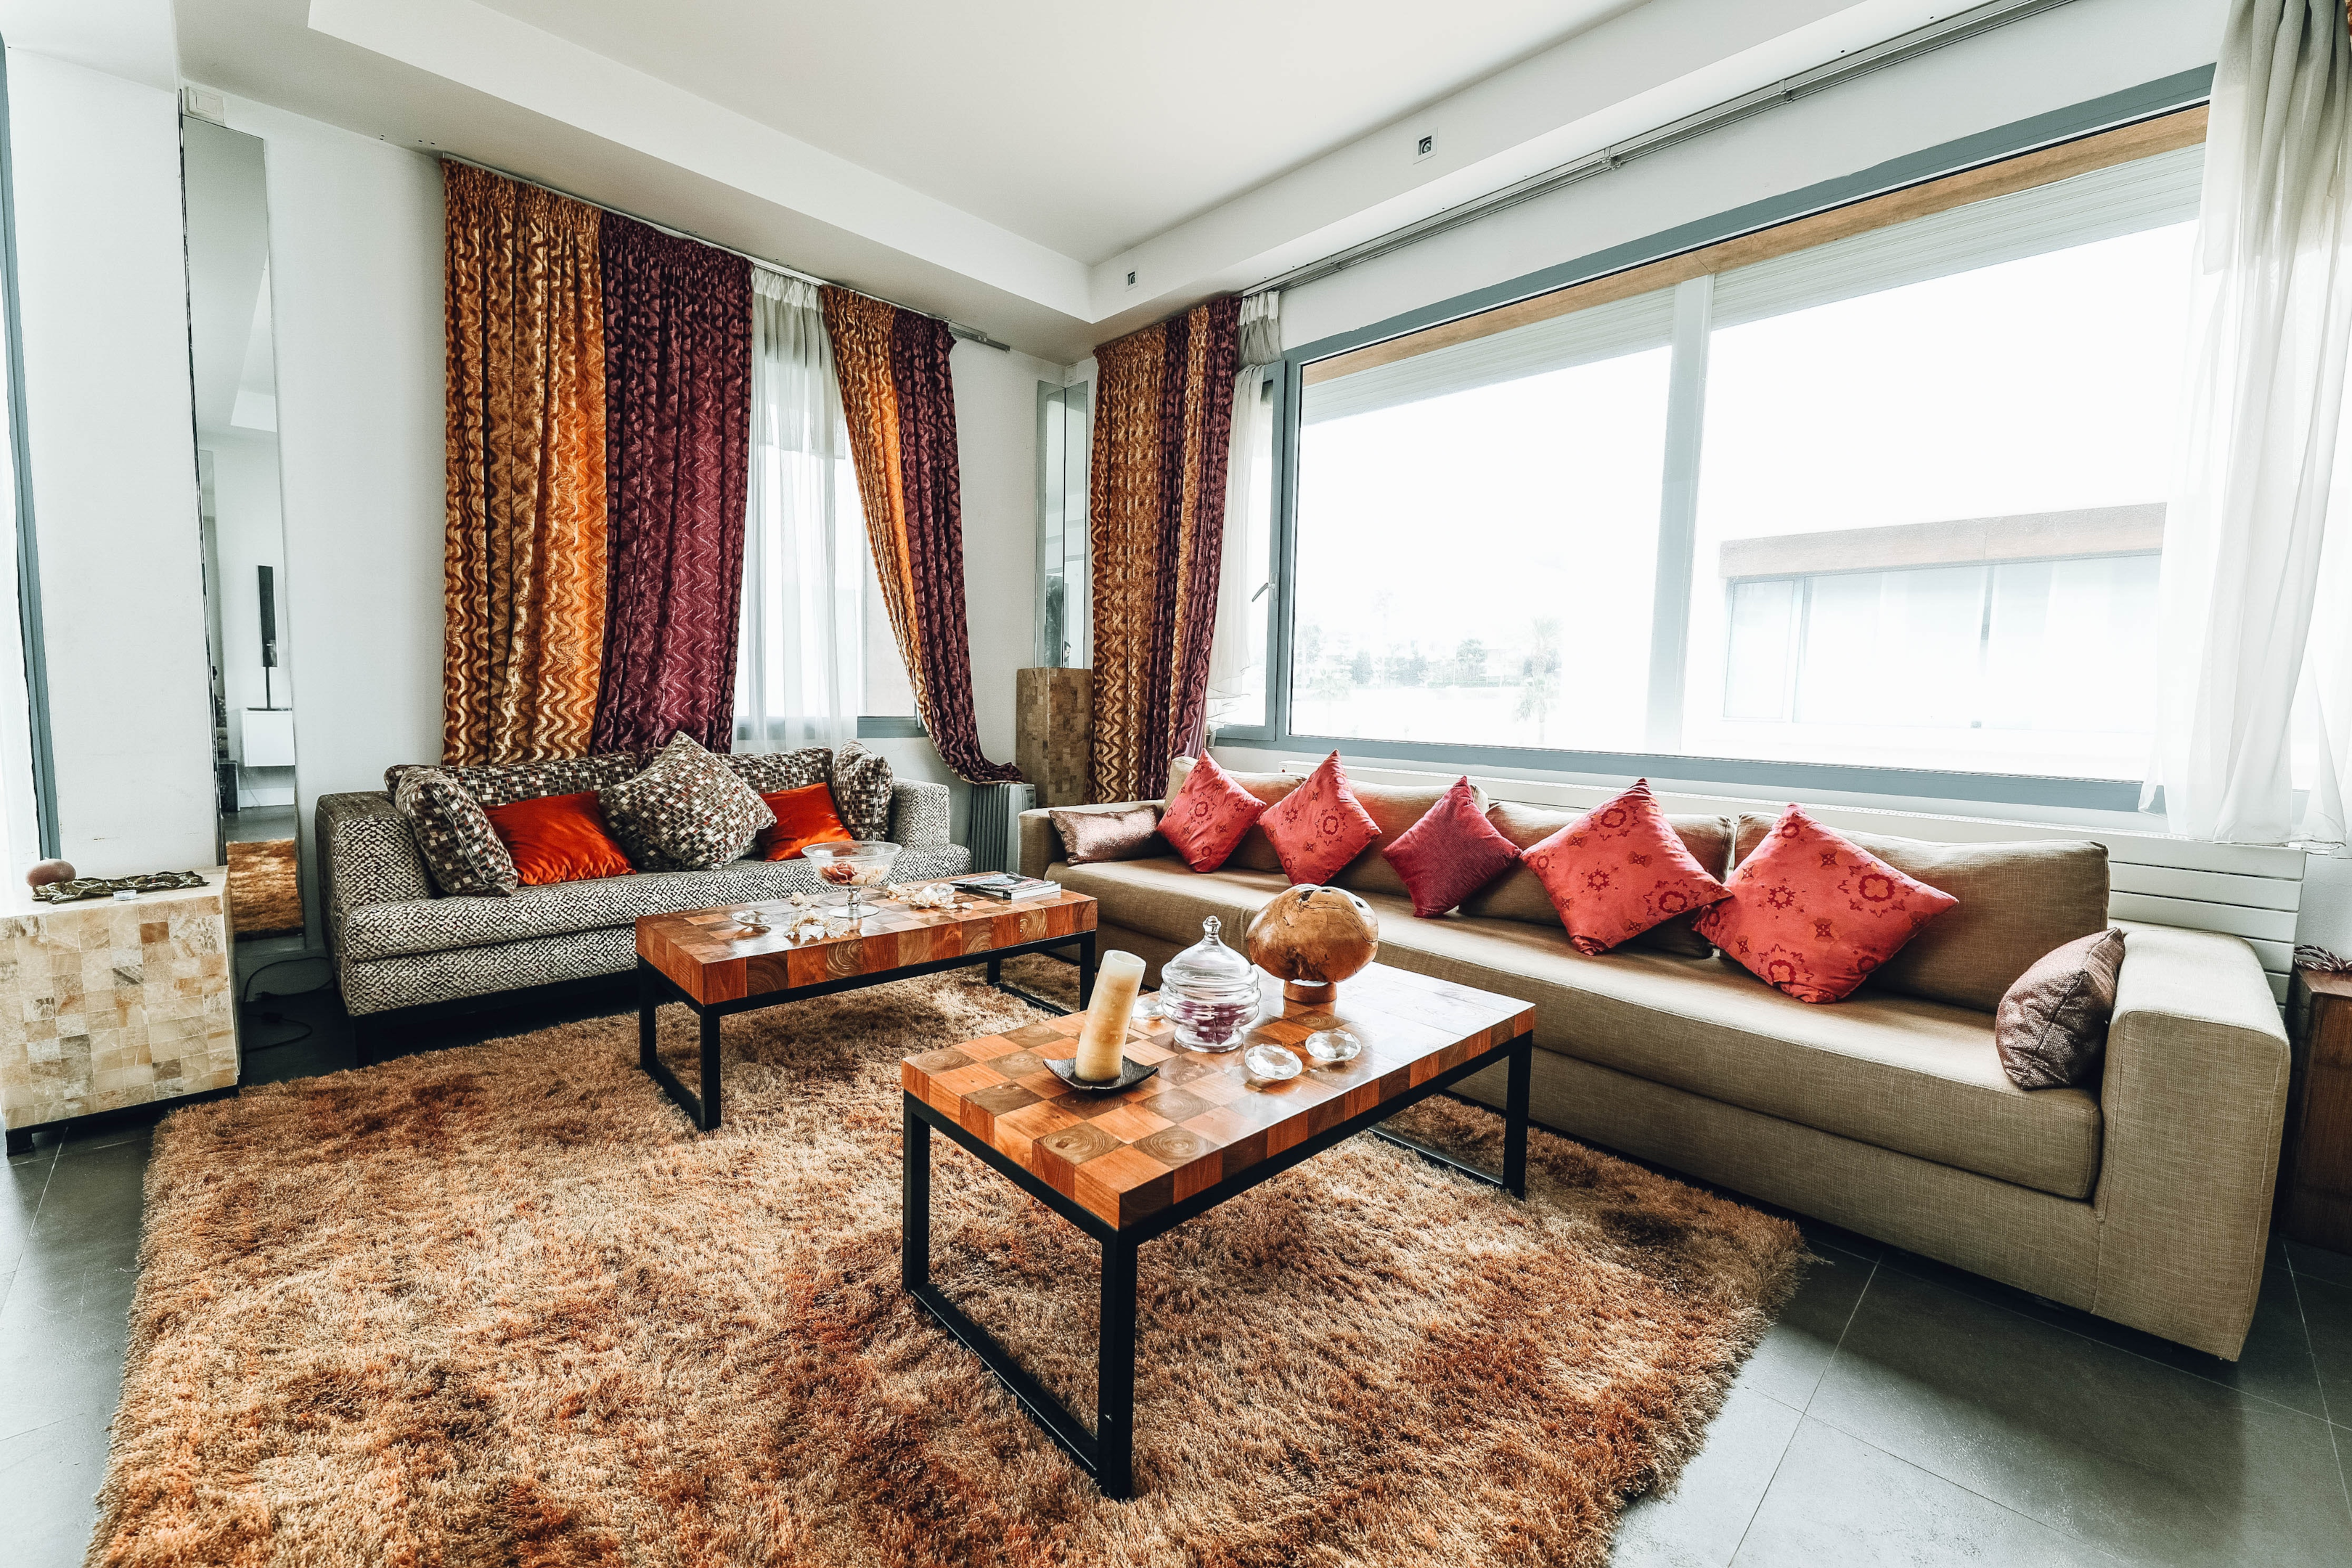 image credit: https://www.pexels.com/photo/brown-leather-sofa-with-red-pillows-near-windows-2029665/